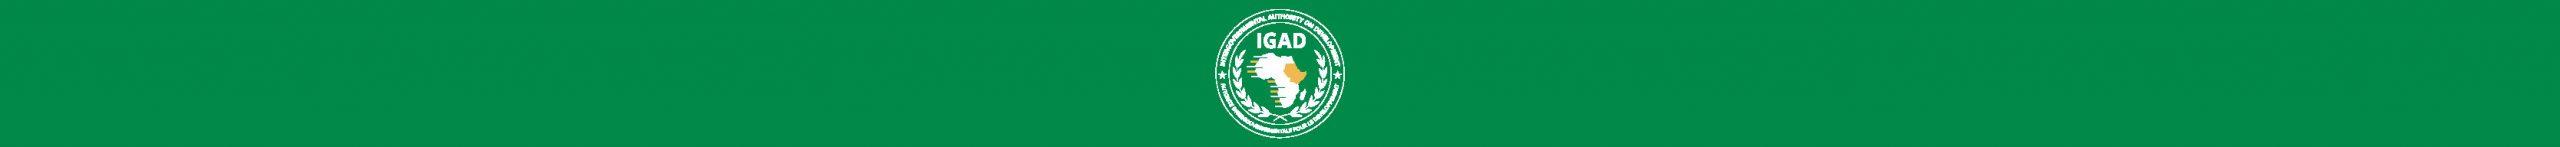 IGAD STRENGTHENS PARTNERSHIP WITH IOM TO ENHANCE CAPACITY FOR EFFECTIVE MIGRATION MANAGEMENT FOR MEMBER STATES